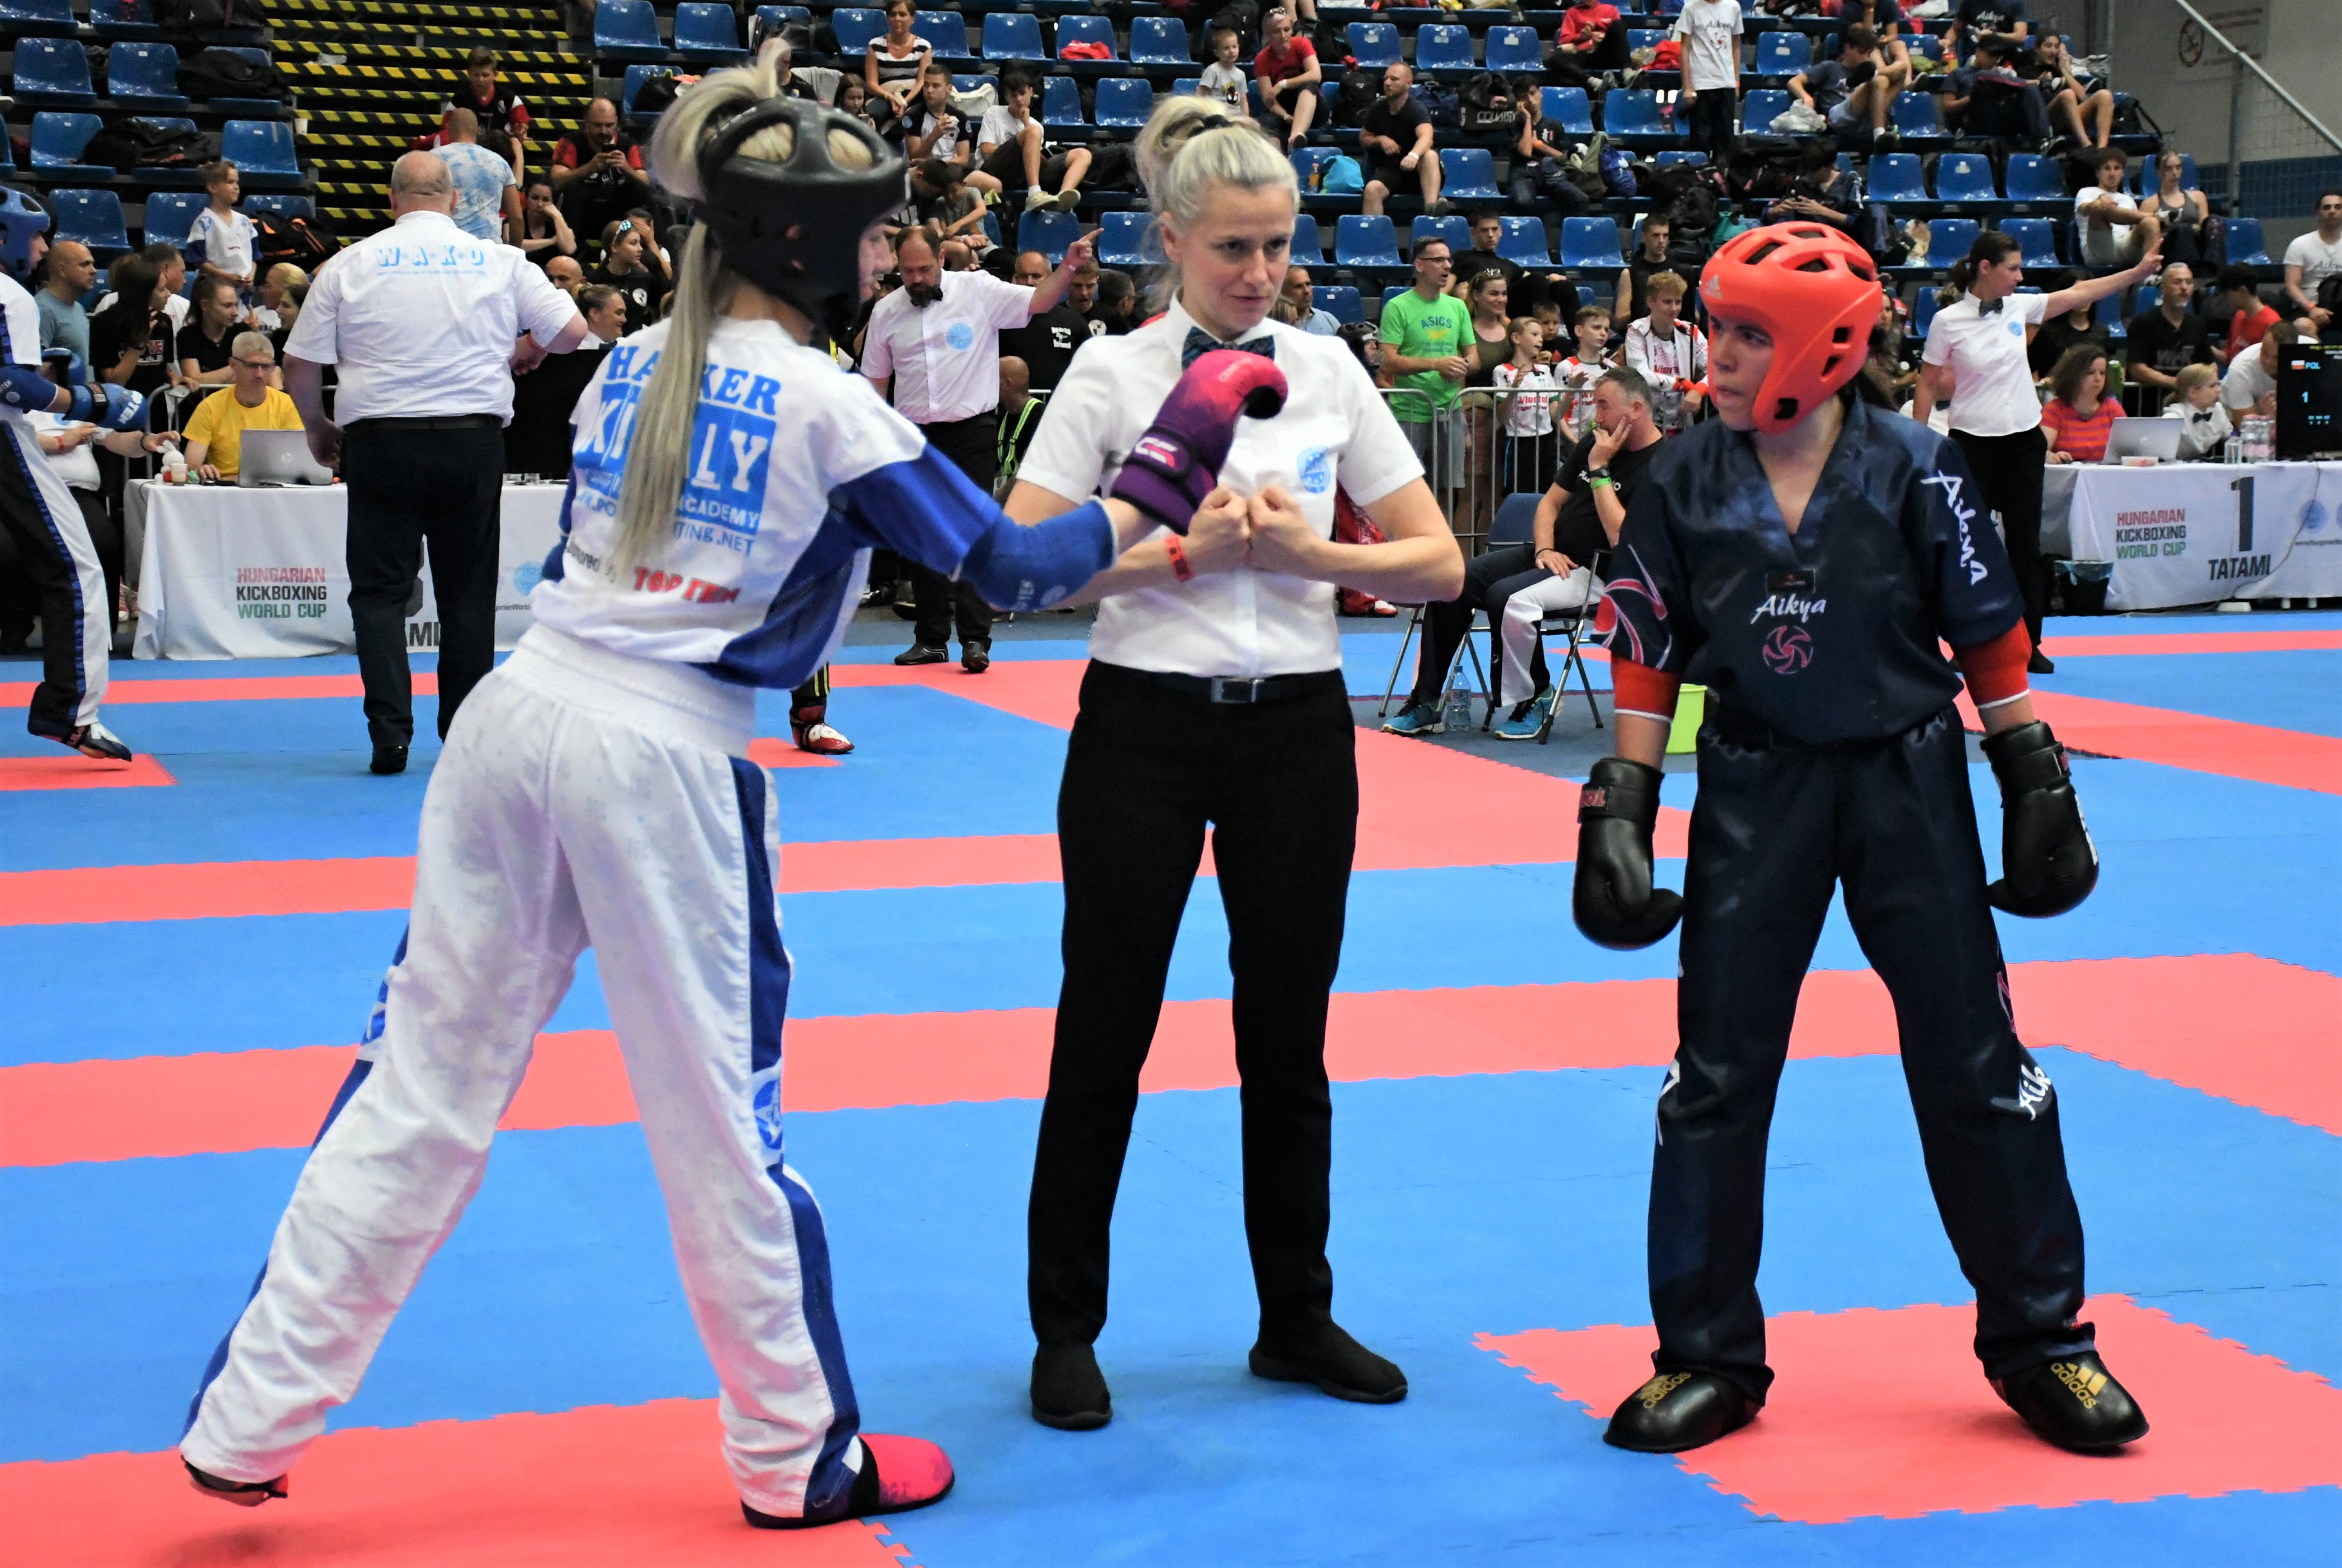 Kickboxing tournament starts in Myslenice Arena on Friday, 30th June